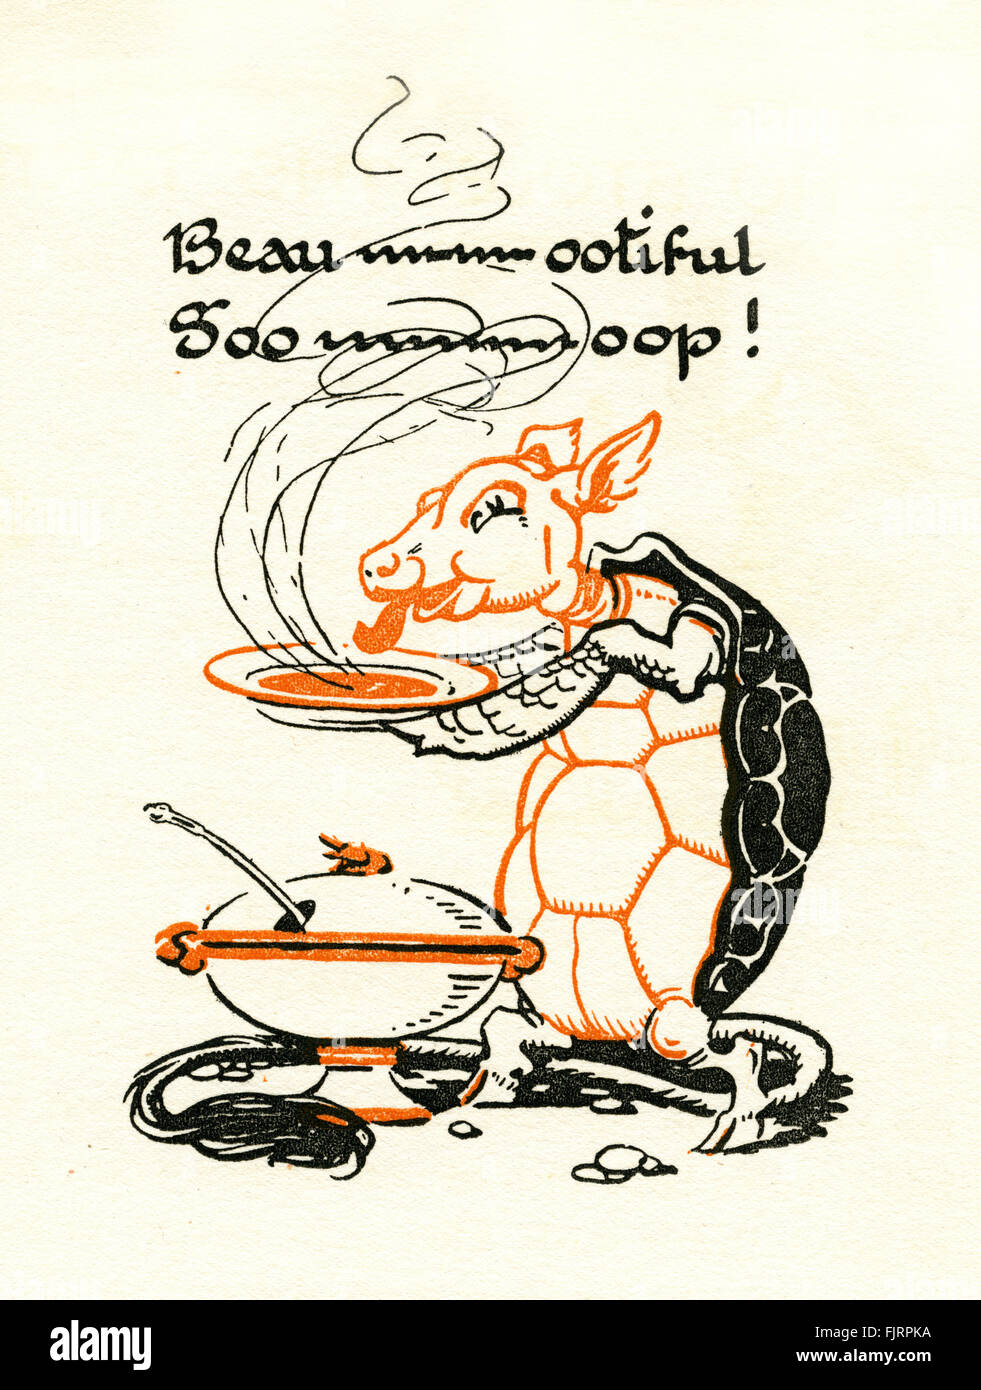 Alice's Adventures in Wonderland by Lewis Carroll. Illustrated by Gwynedd M Huson (dates not known).    The Mock Turtle's song: Beautiful Soup, so rich and green... Chapter 10.  LC - British mathematician and author - real name Charles Lutwidge Dodgson: 27 January 1832 – 14 January 1898 Stock Photo